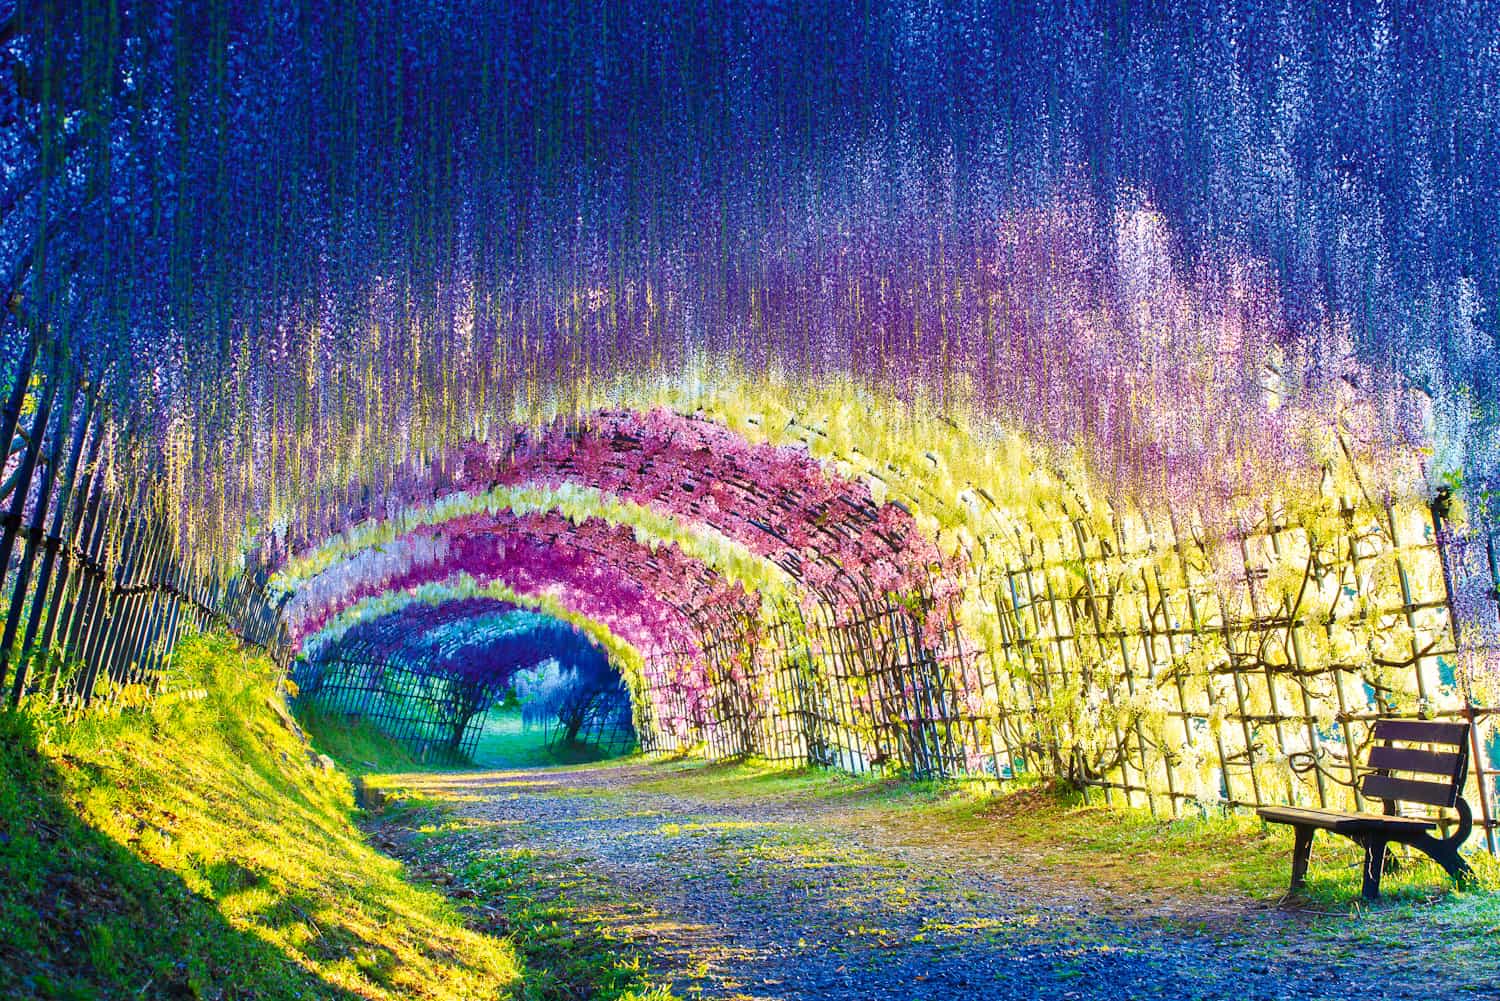 There were no special effects, no photoshop, no editing involved. Wisteria Tunnel